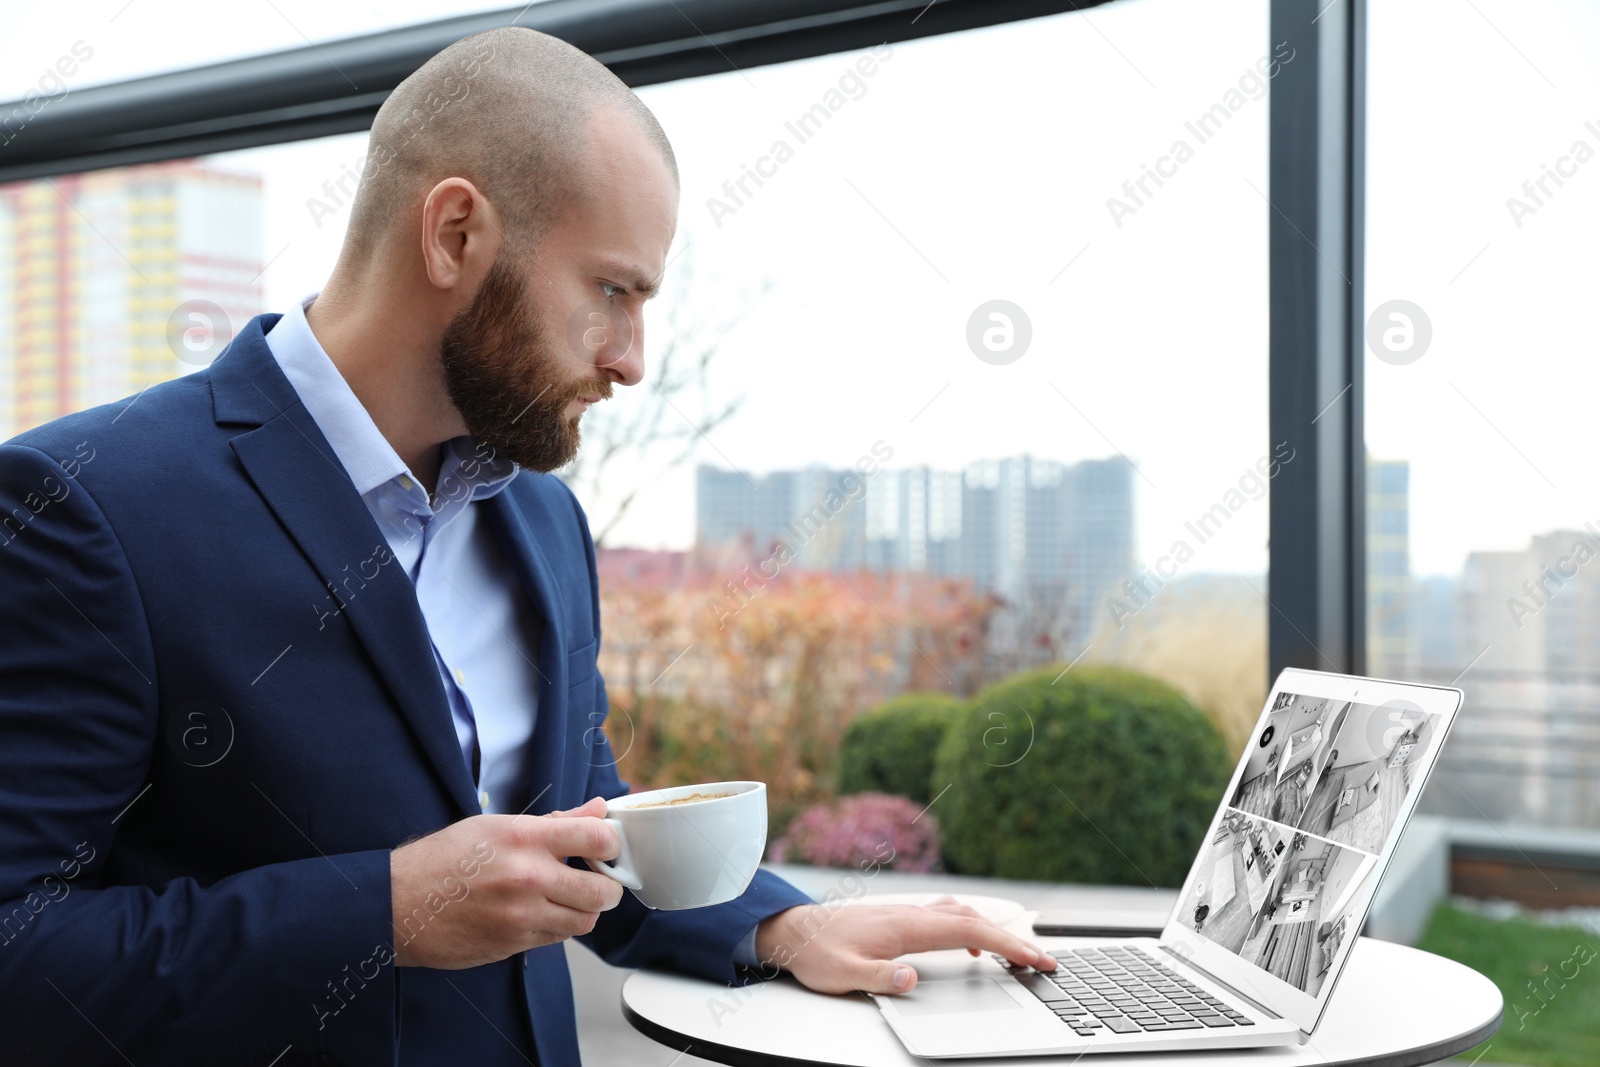 Image of Man monitoring modern cctv cameras on laptop indoors. Home security system